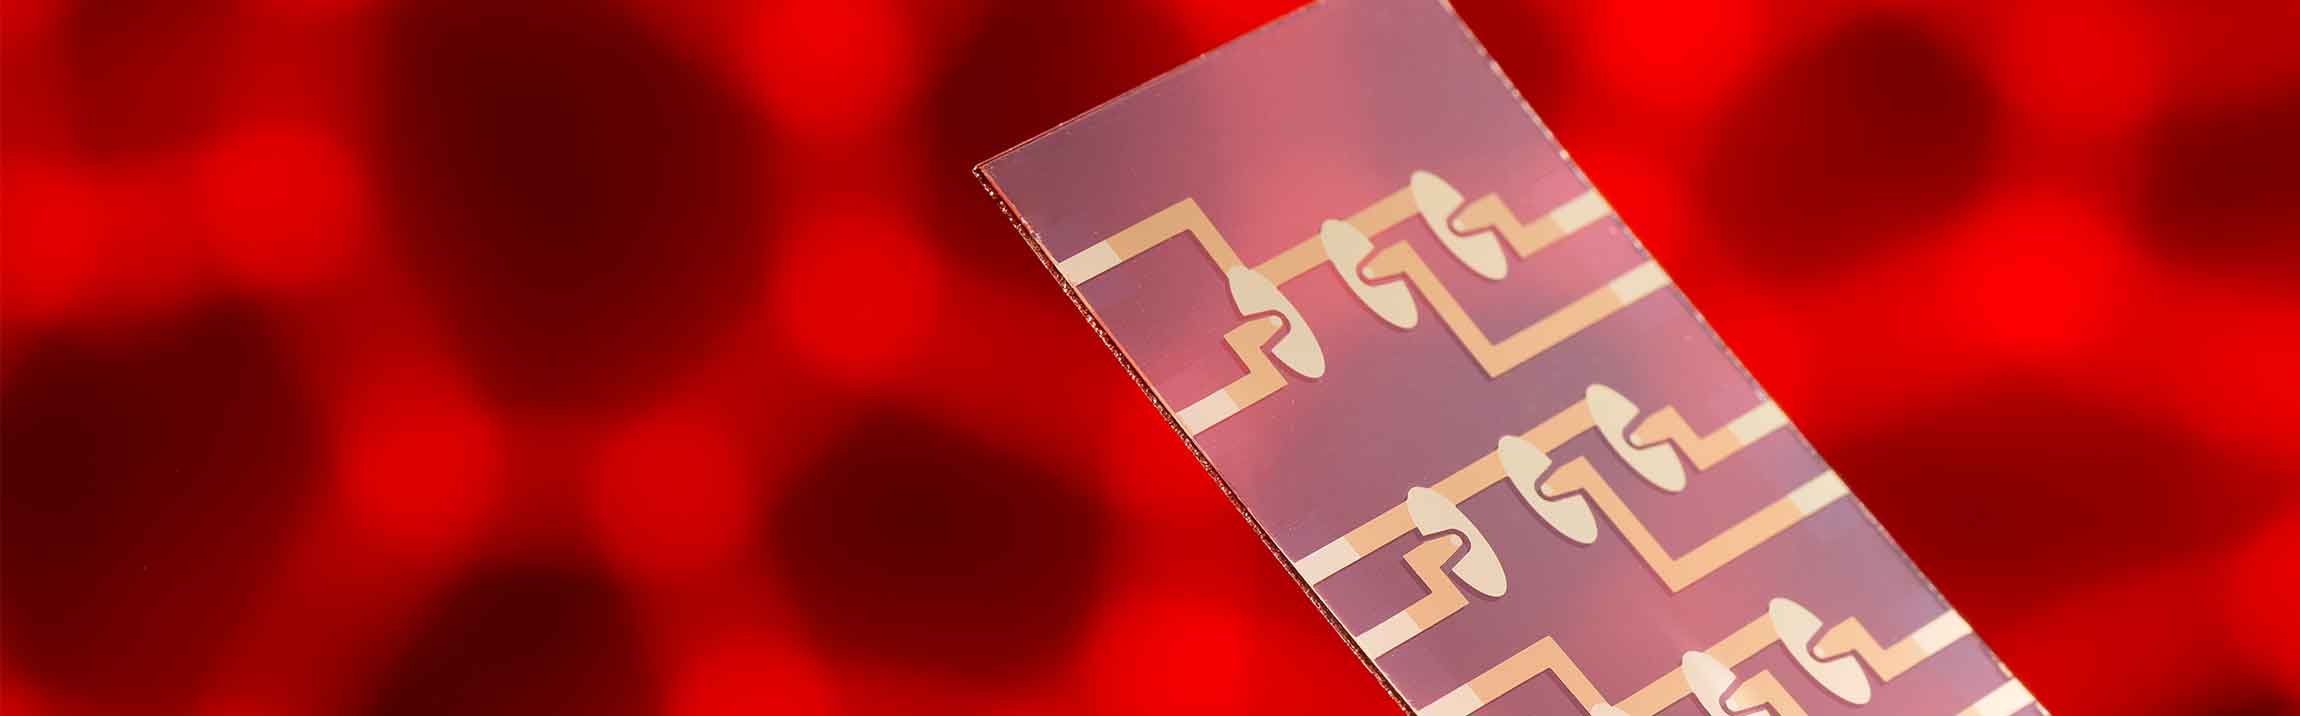 Multi-electrode layout for parallel investigation of multiple cell samples in microfluidic chips.